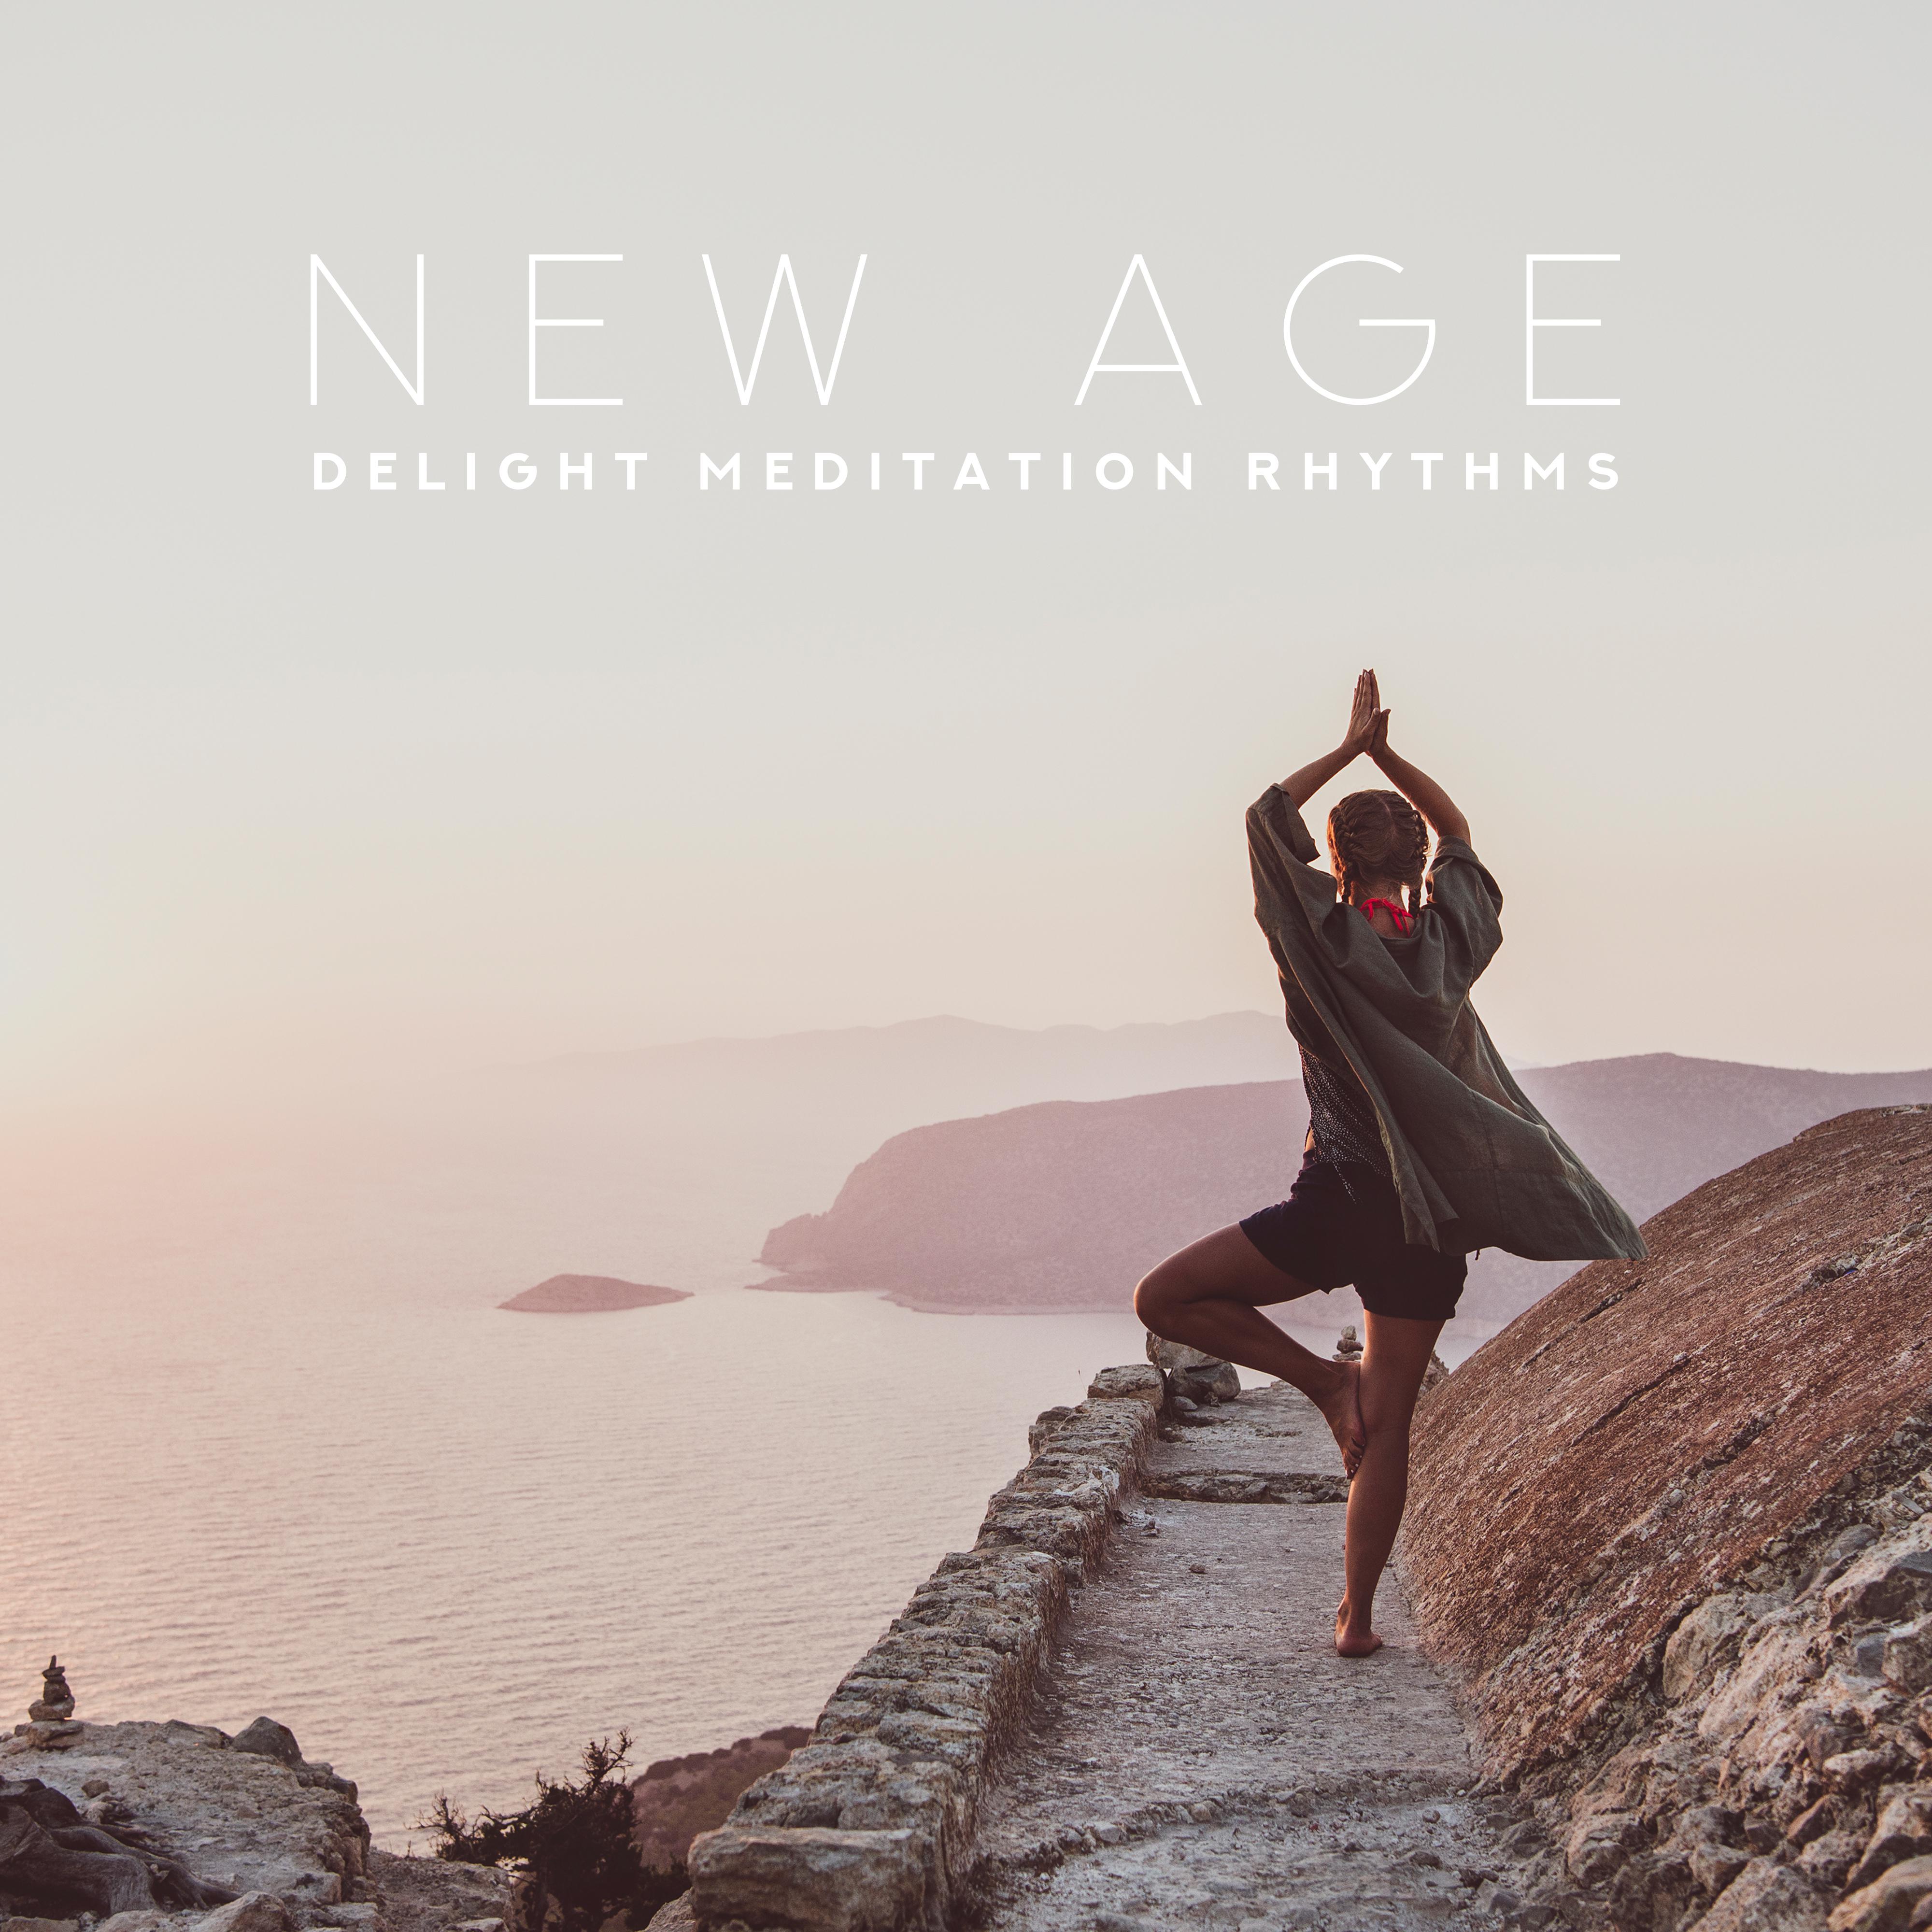 New Age Delight Meditation Rhythms: 2019 Fresh Ambient Music Compilation for Deep Yoga & Relaxation, Body & Mind Control Improve, Healing Chakras, Third Eye Opening